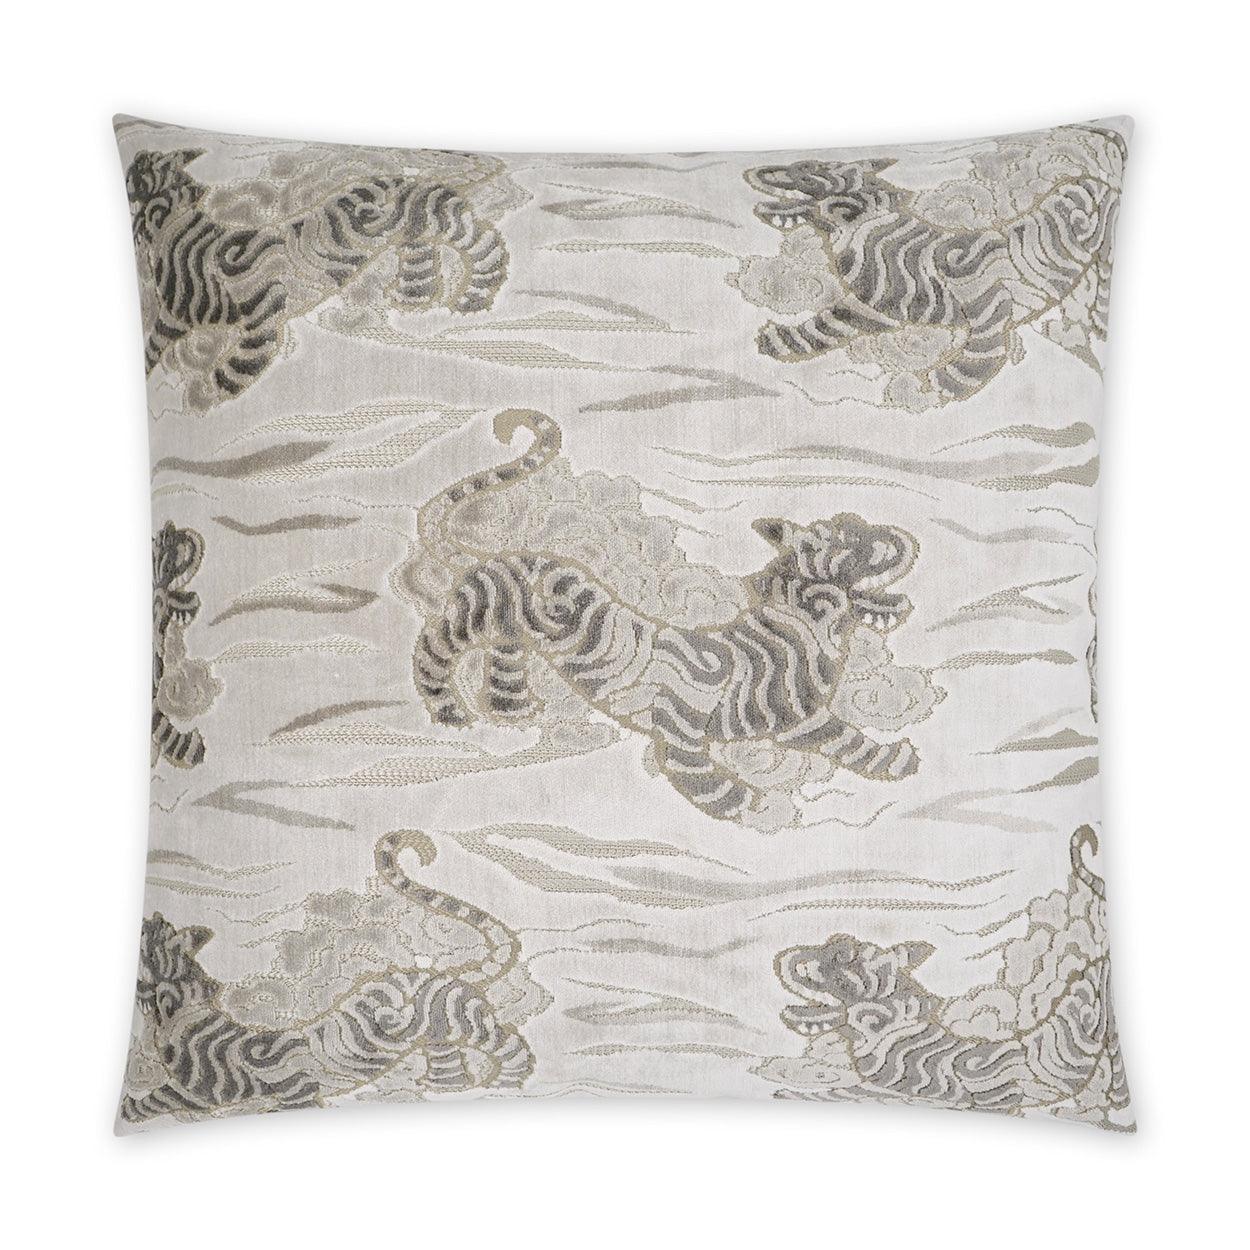 Dynasty Cloud Animal Novelty Ivory Large Throw Pillow With Insert - Uptown Sebastian